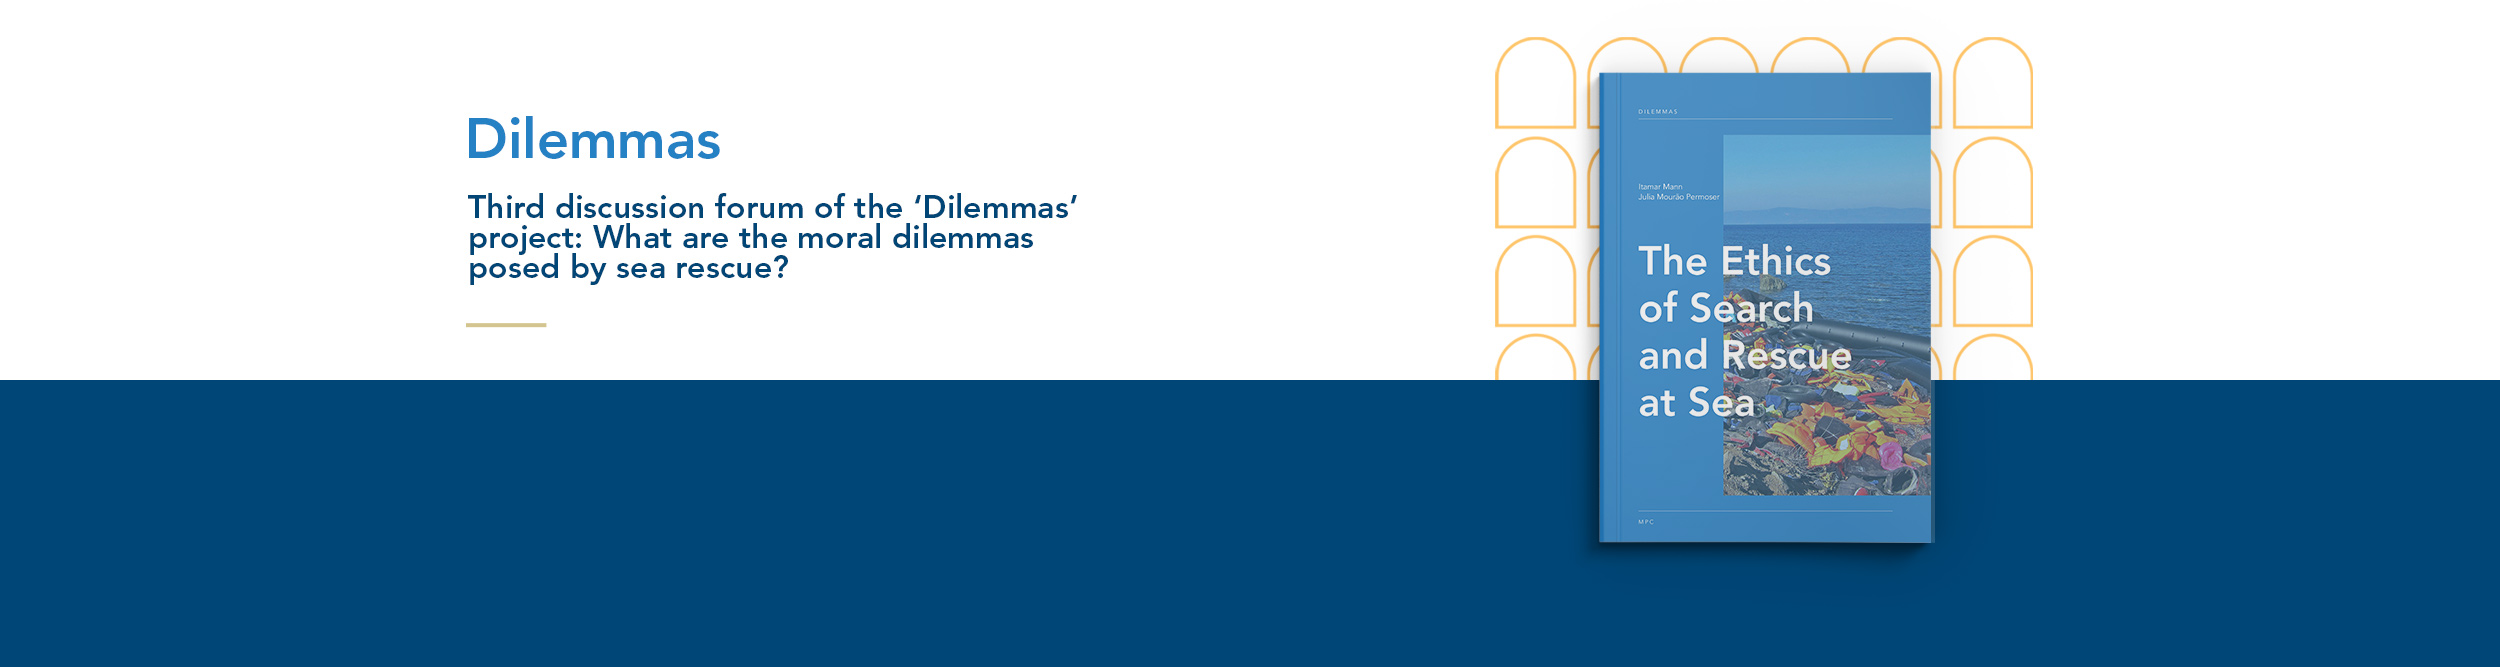 Permalink to:We have started our third ‘Dilemmas’ project’s discussion about the ethics of sea rescue